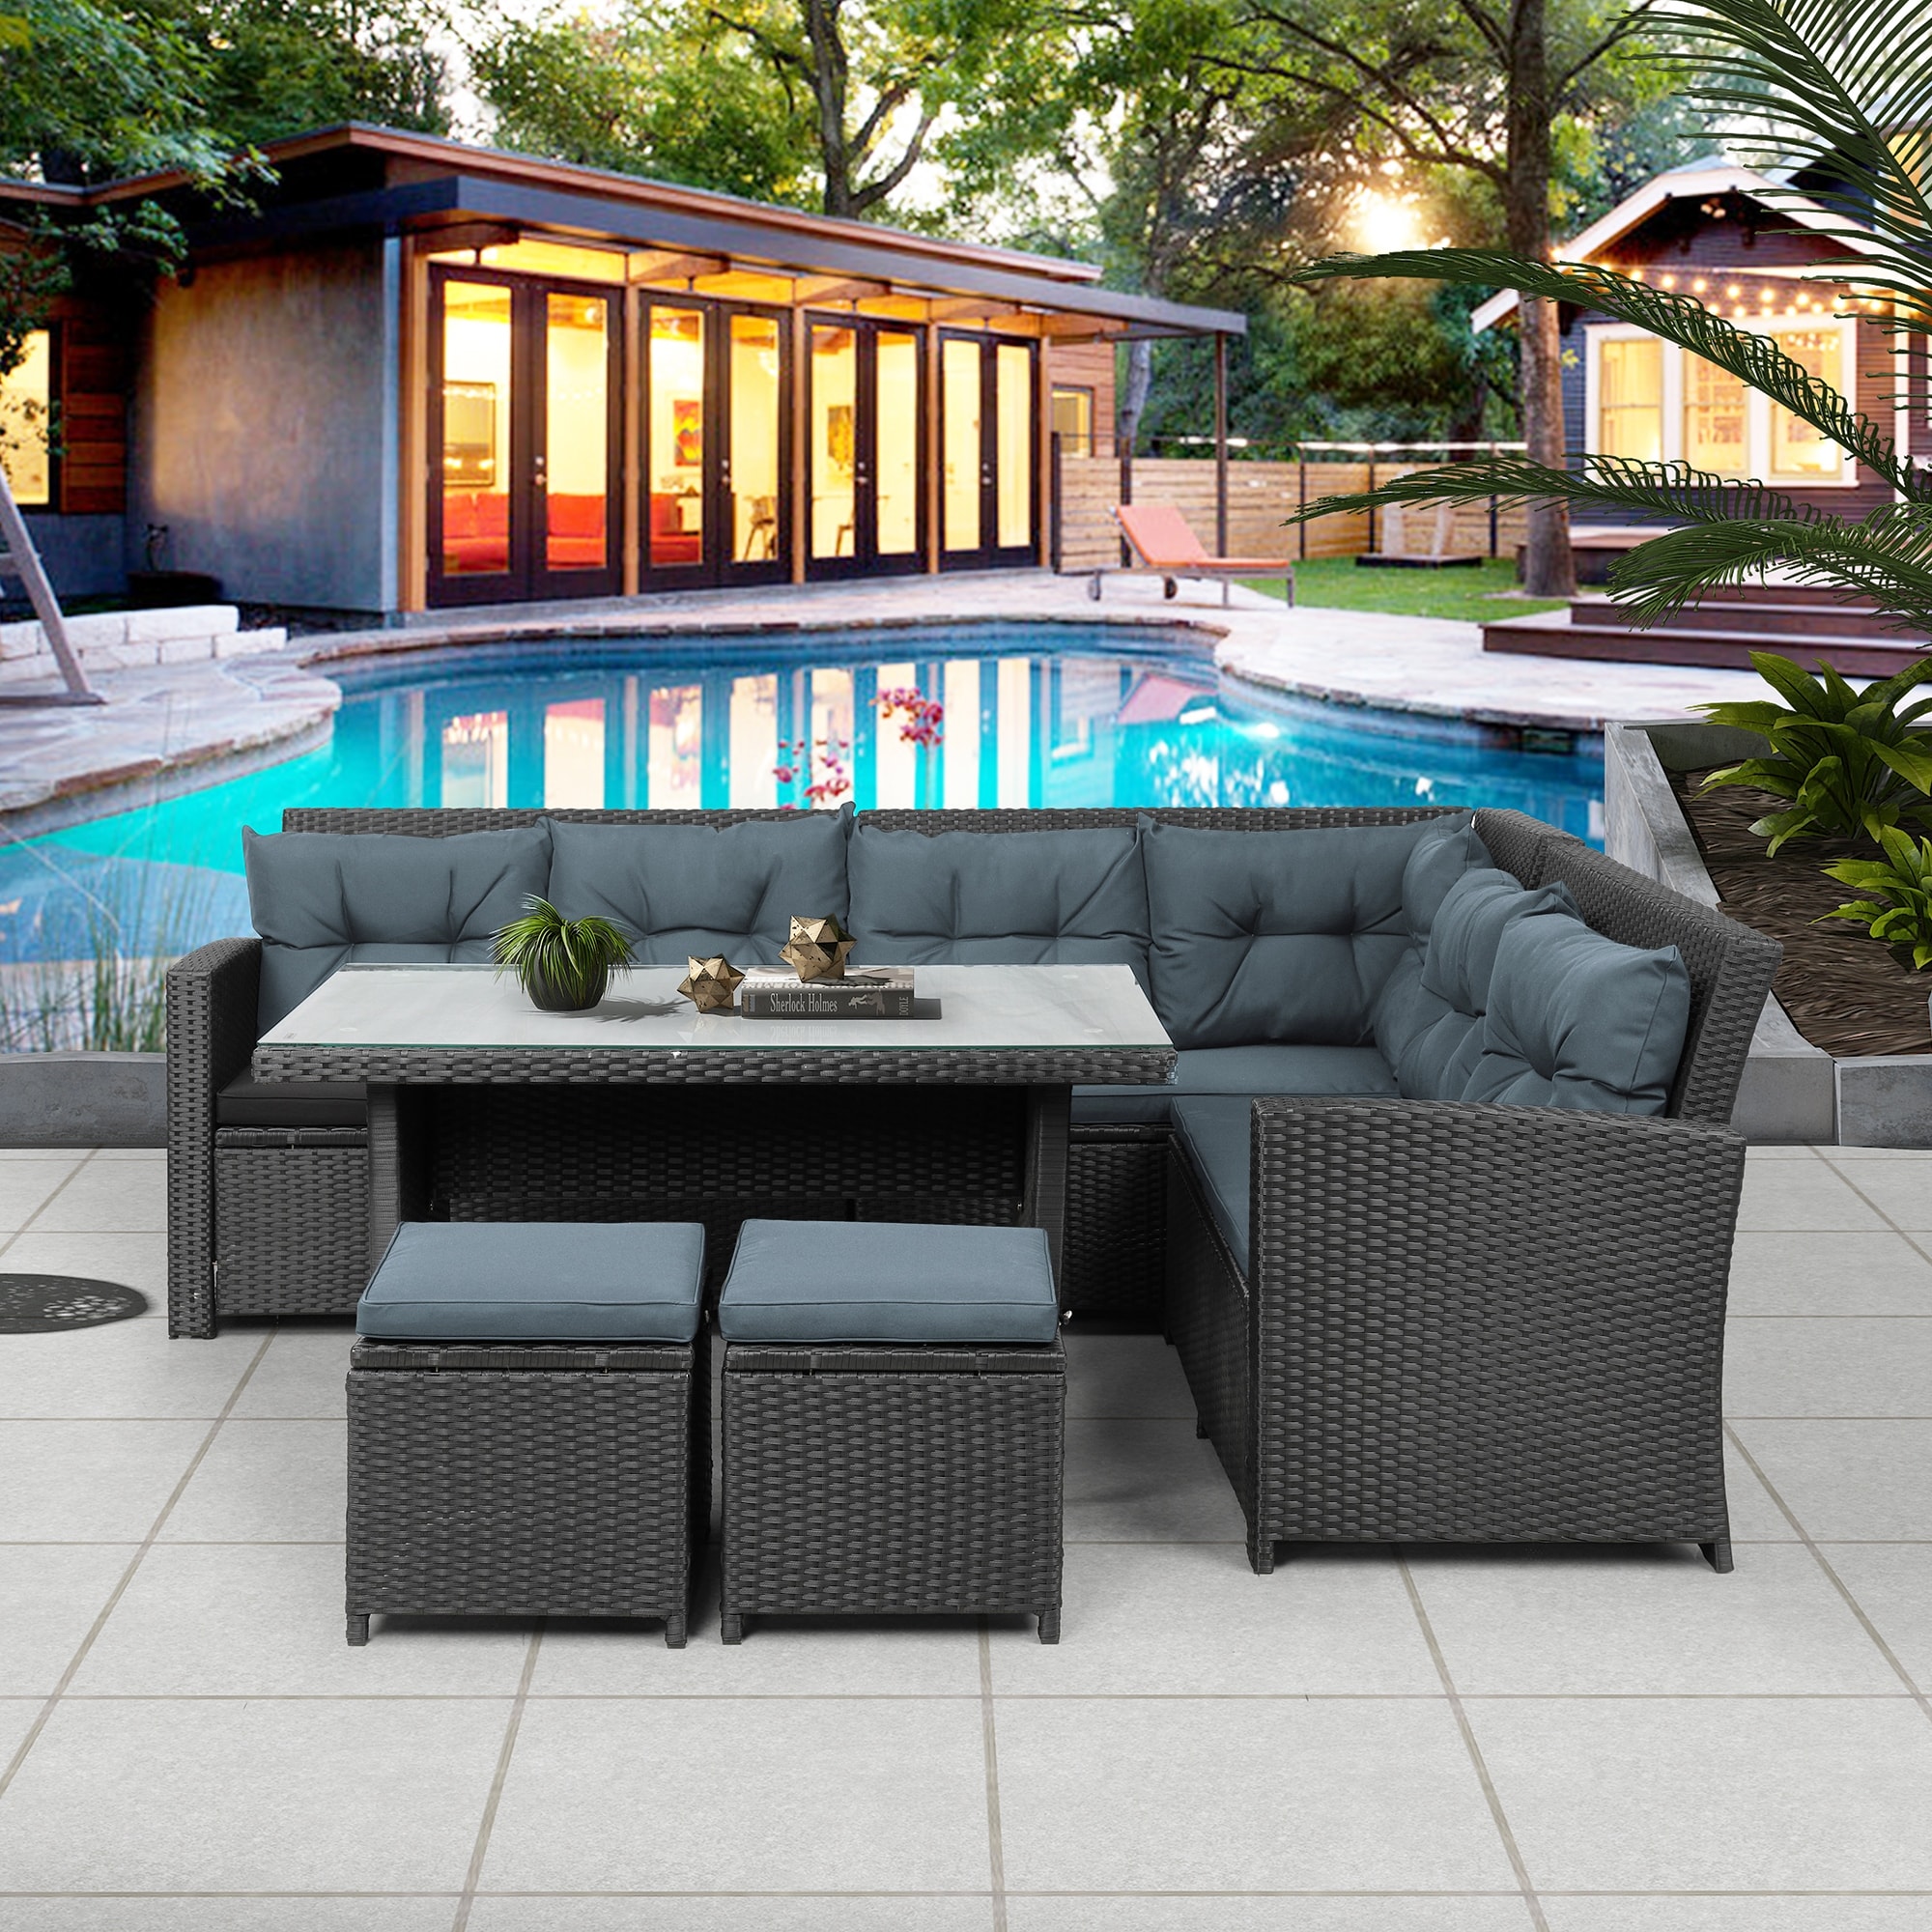 6-piece Outdoor Rattan Sectional Sofa Set With Glass-top Table  2 Ottomans And Cushions